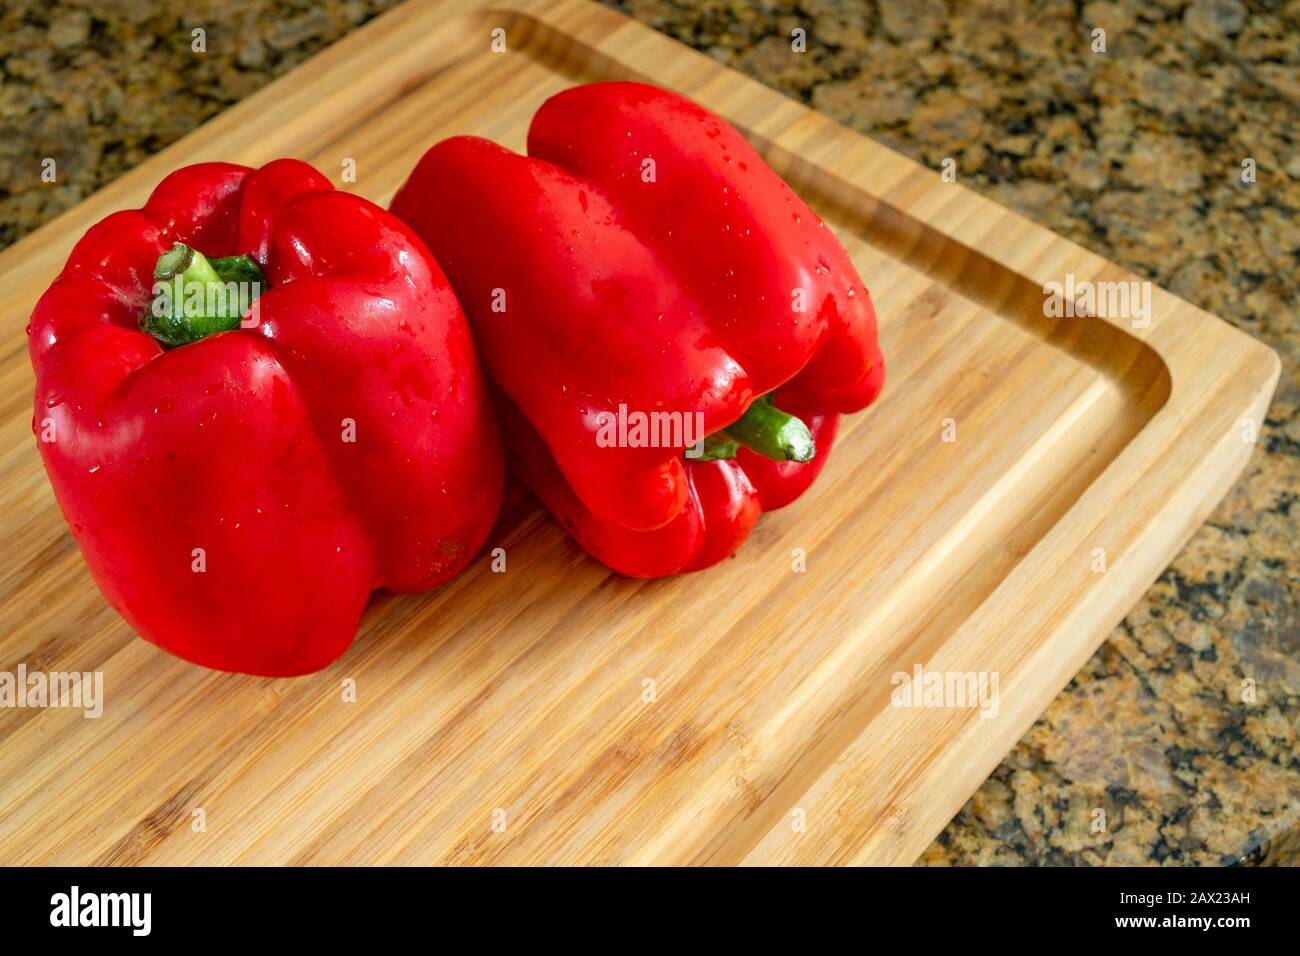 Red peppers in a wooden cutting board, realistic approach to imperfect food ingredients. Stock Photo